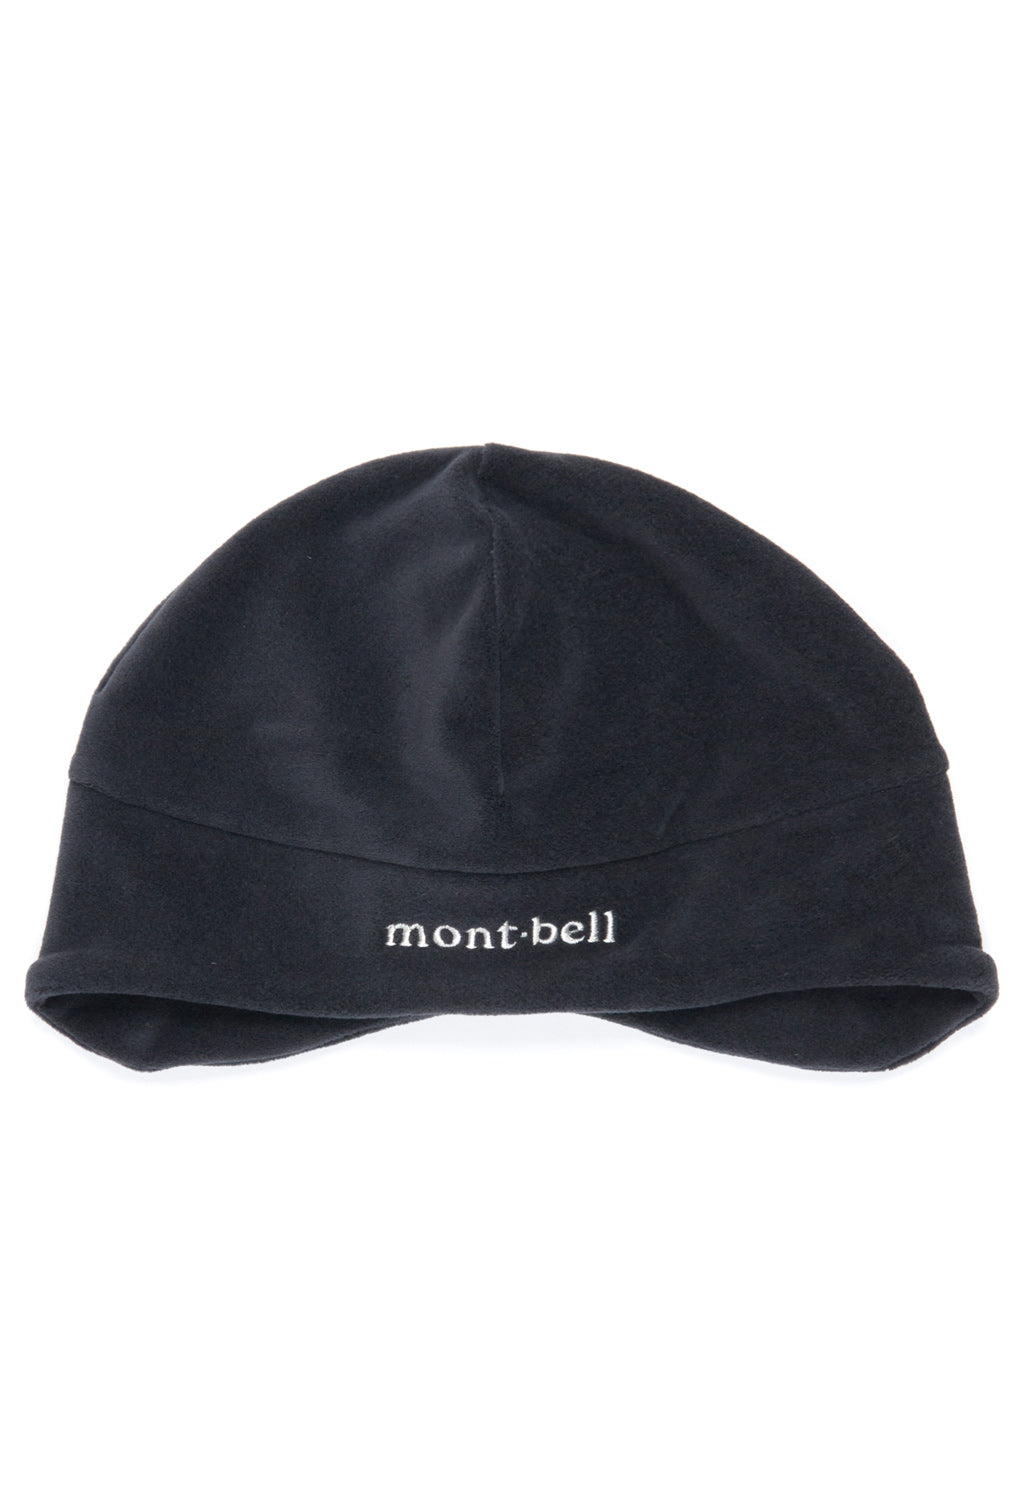 Montbell Chameece Cap With Ear Warmer - Black